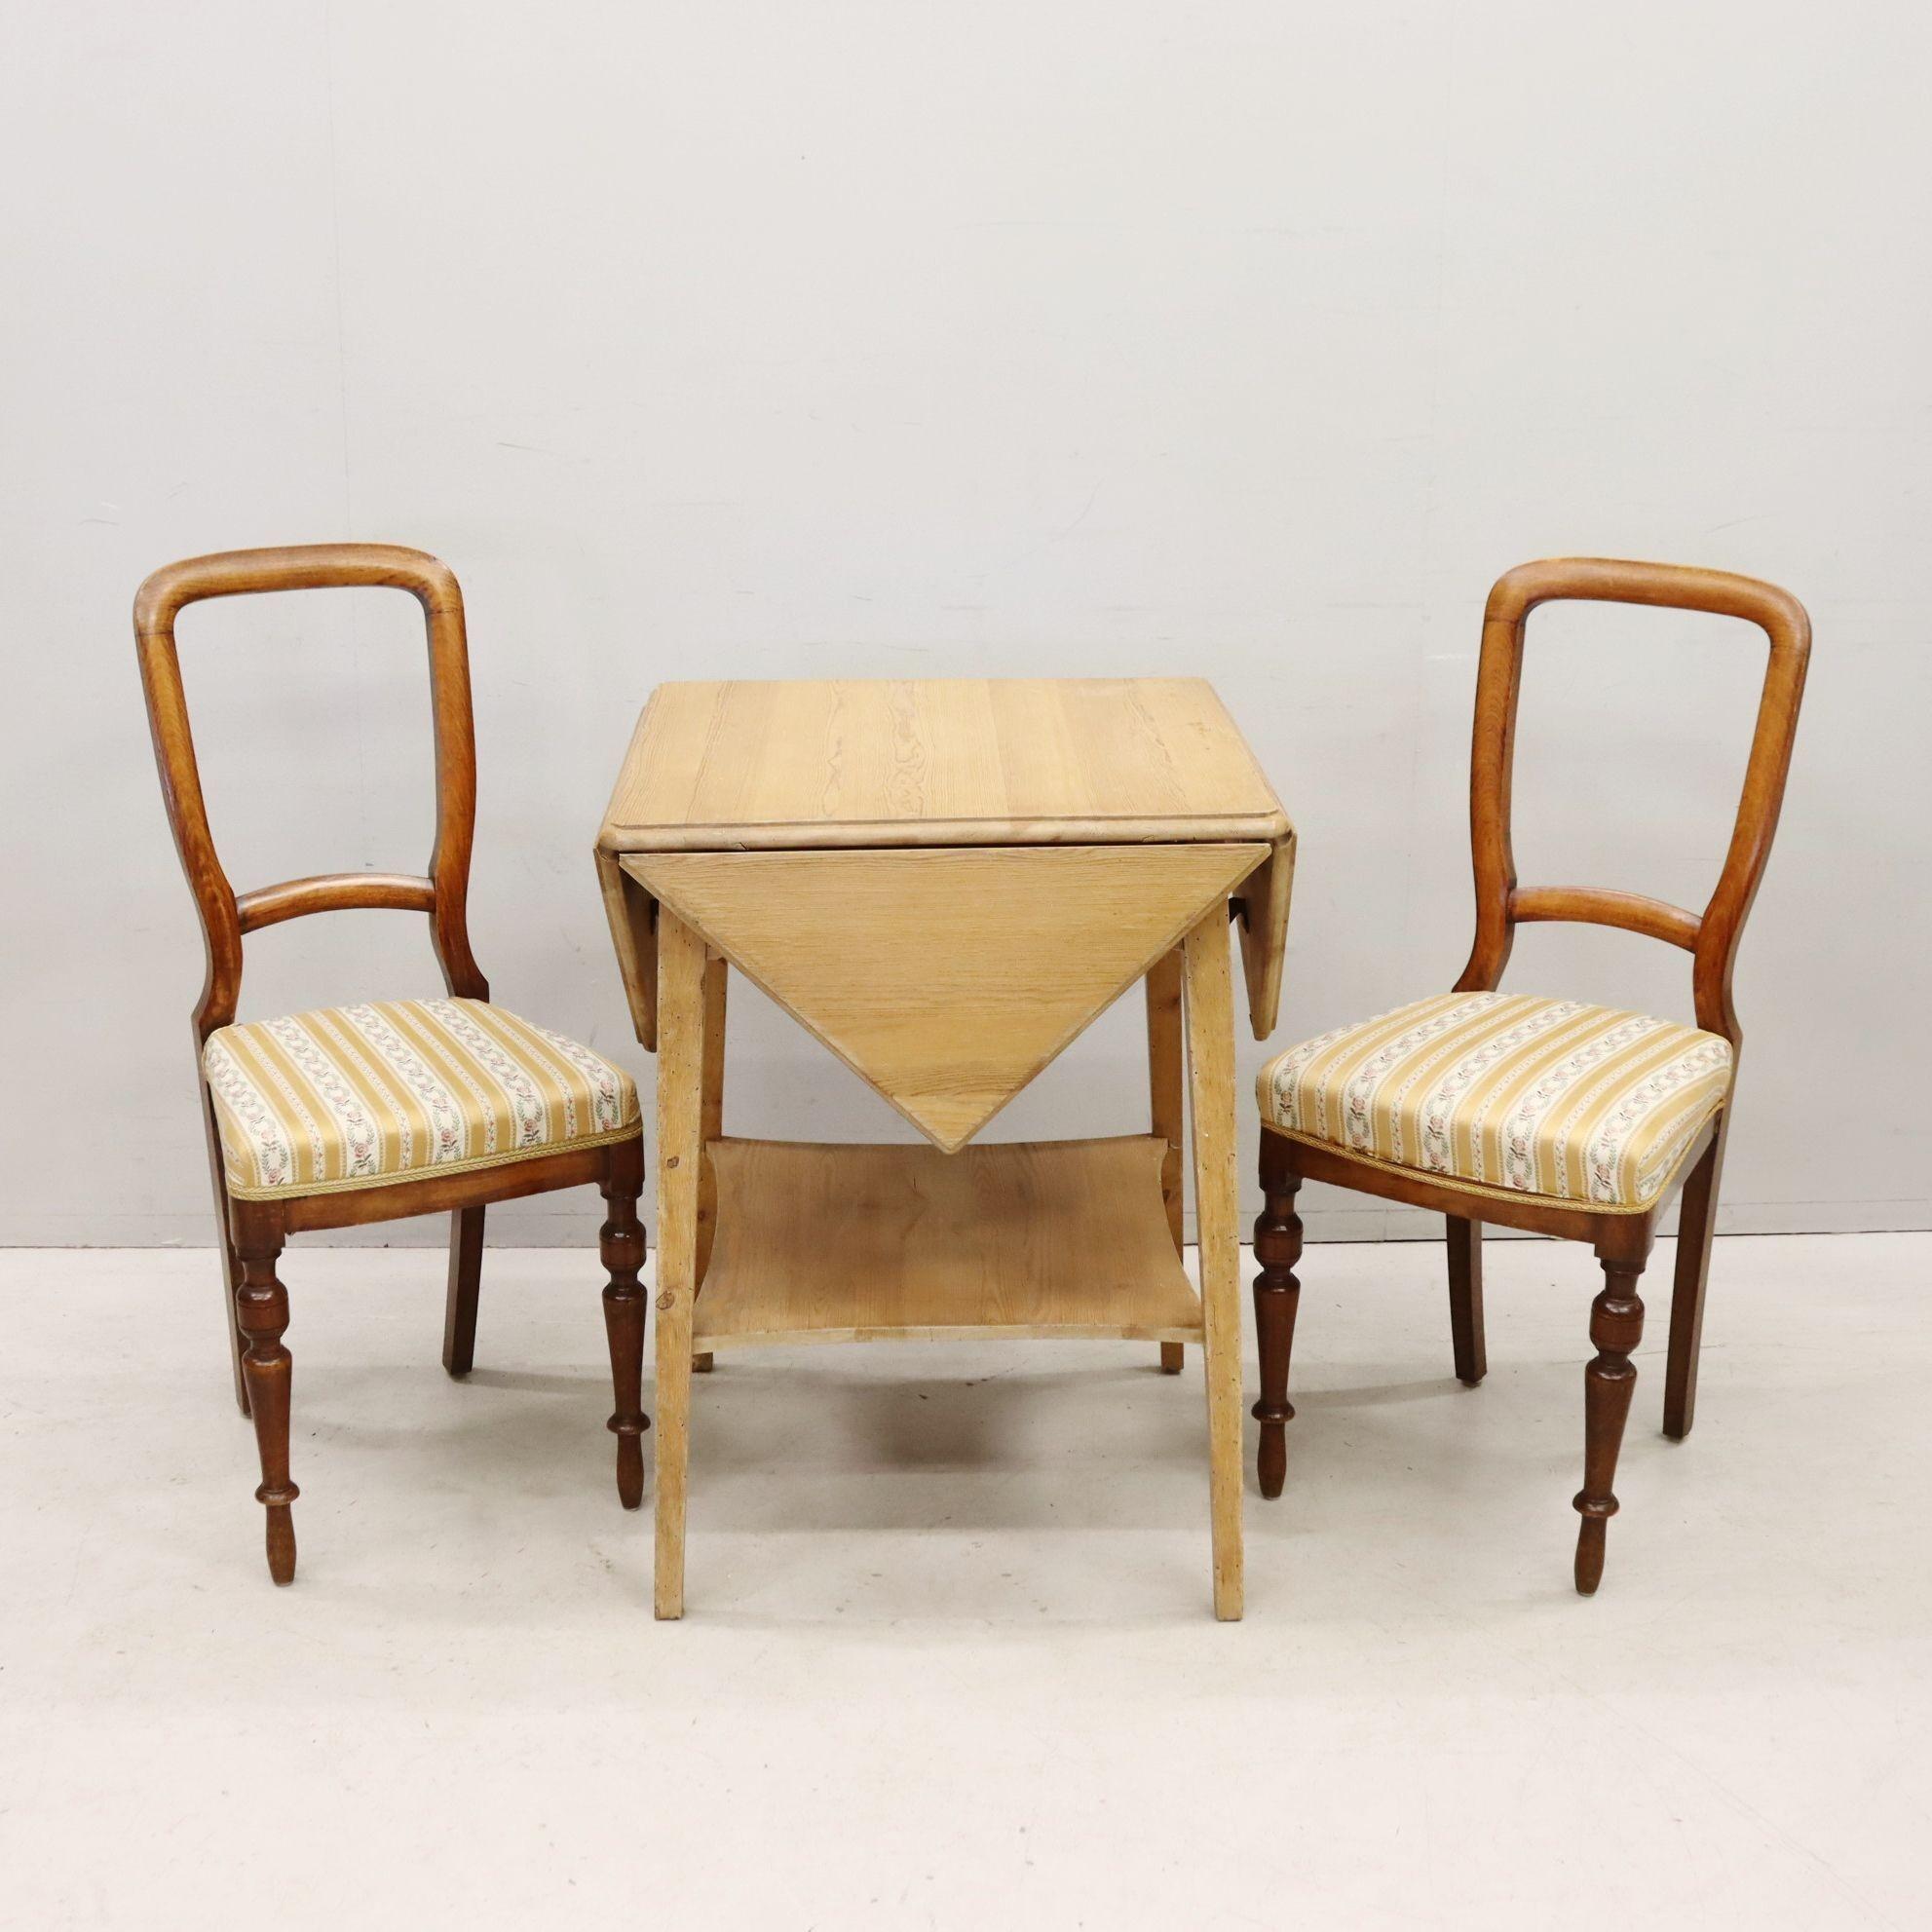 Swedish pine envelope table from (we're guessing) the late 1800s/early 1900s. Four folding flap leaves in triangle shape, can be left down or extended. Pair of chairs from the same era, most likely mahogany with classic turned legs and original silk